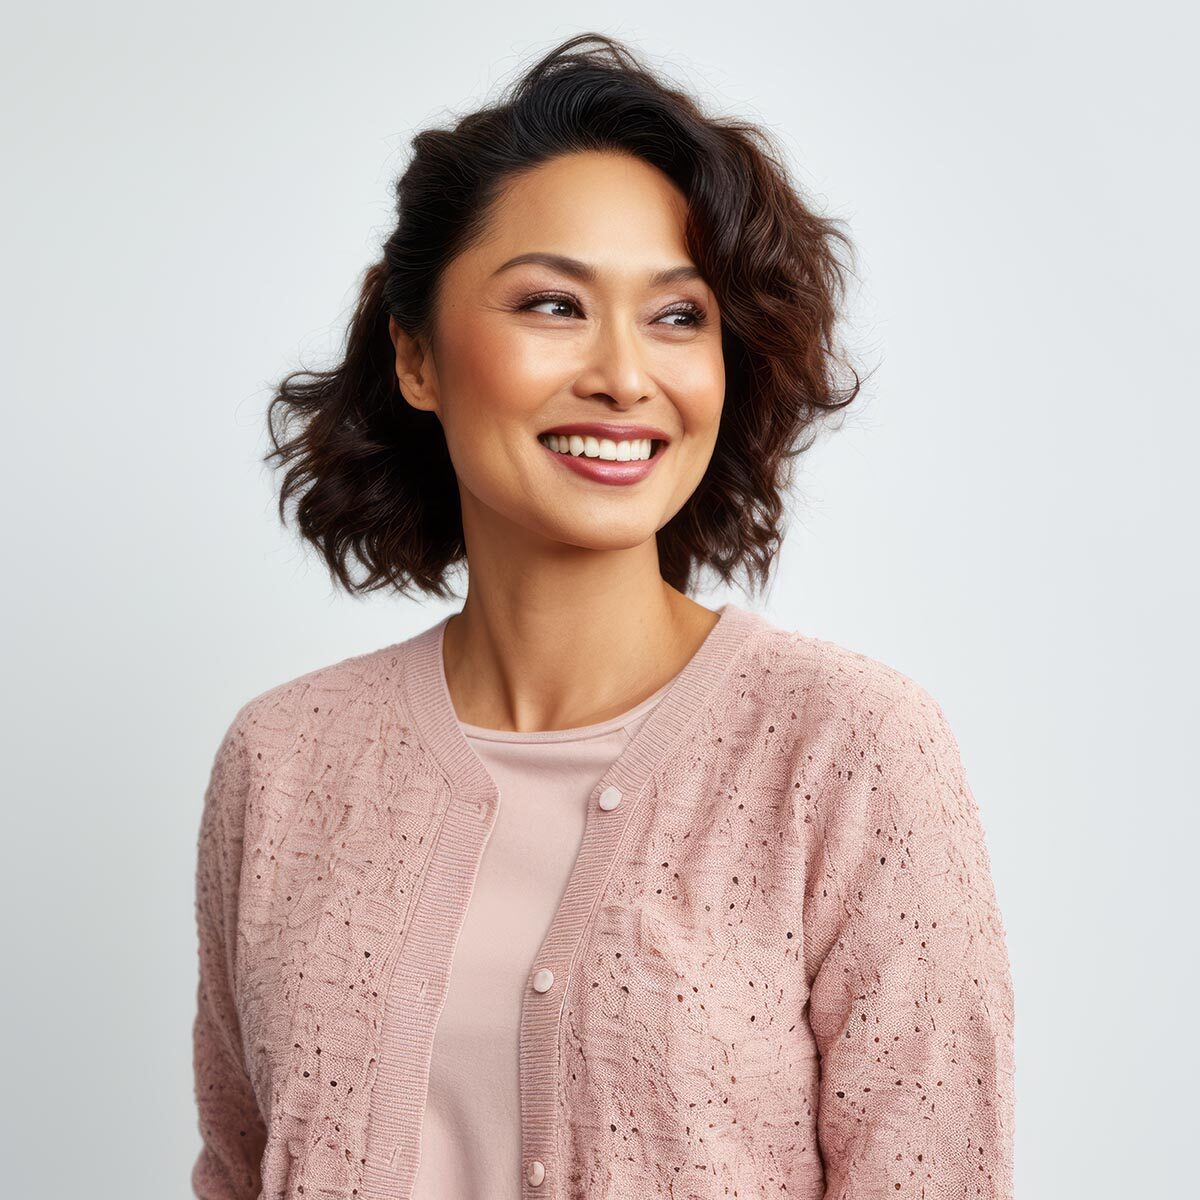 Smiling woman with short wavy hair wearing a pink cardigan on a light background.